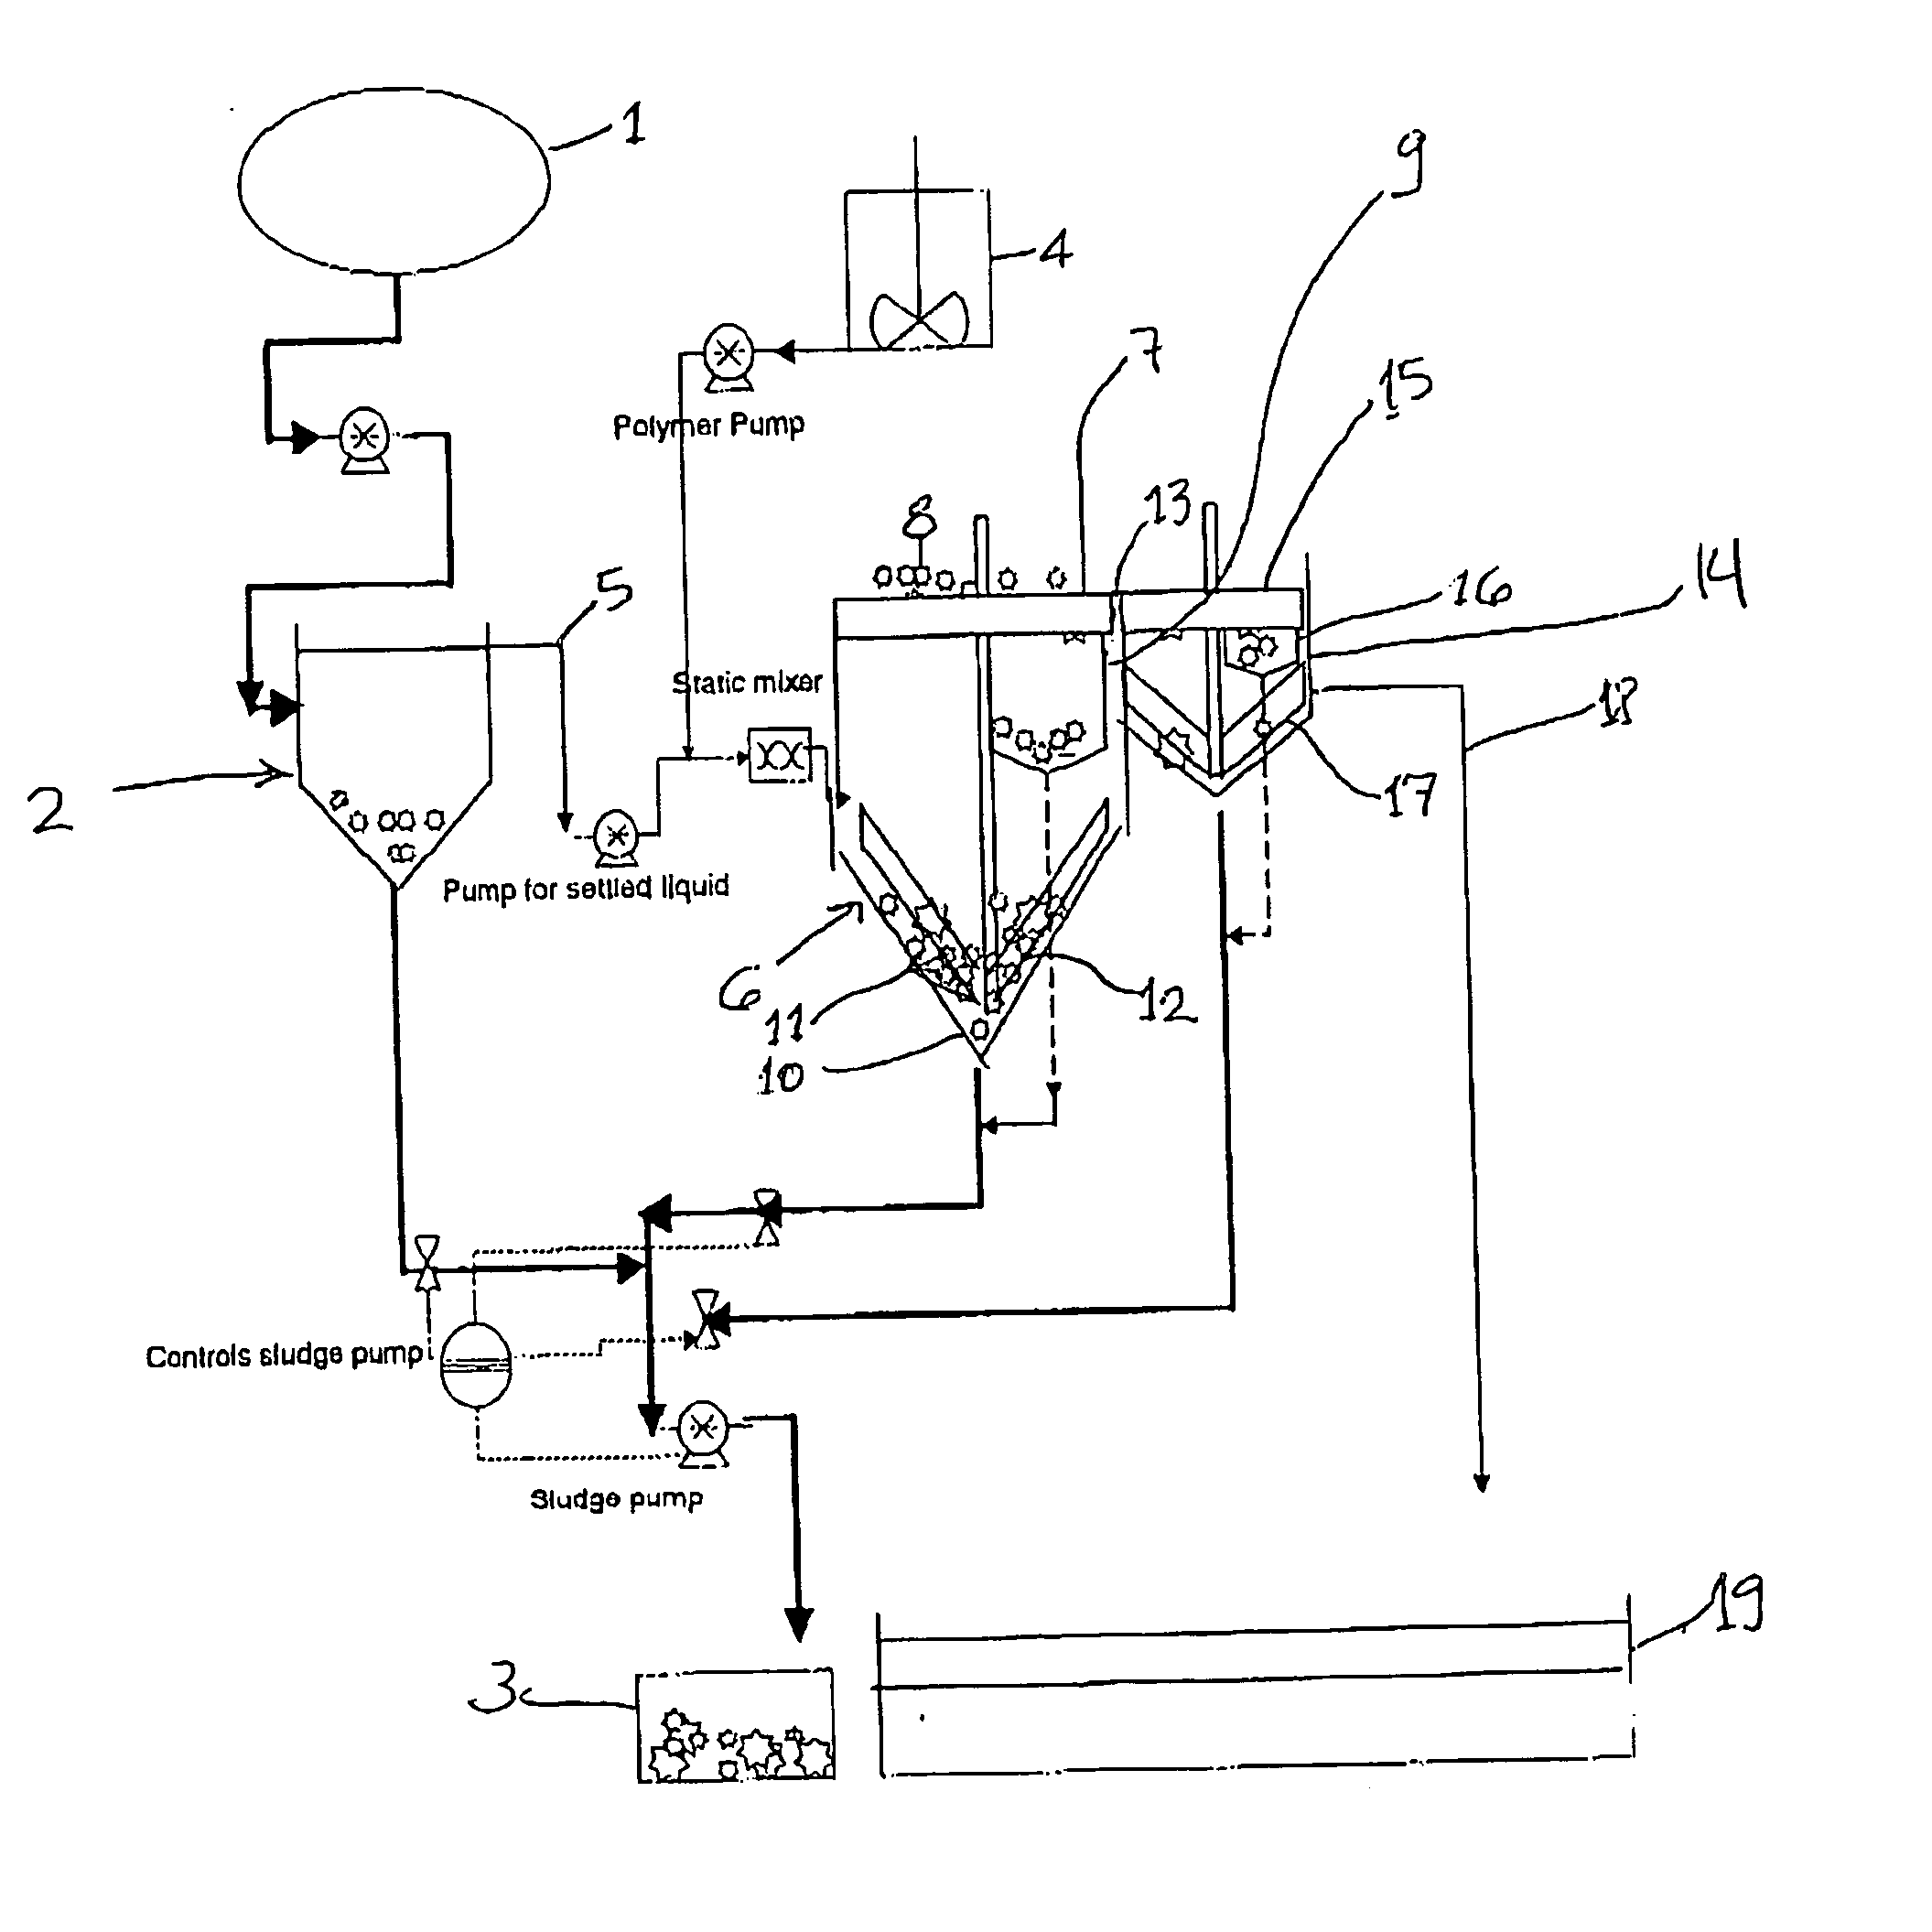 Methods and apparatus for treating animal manure